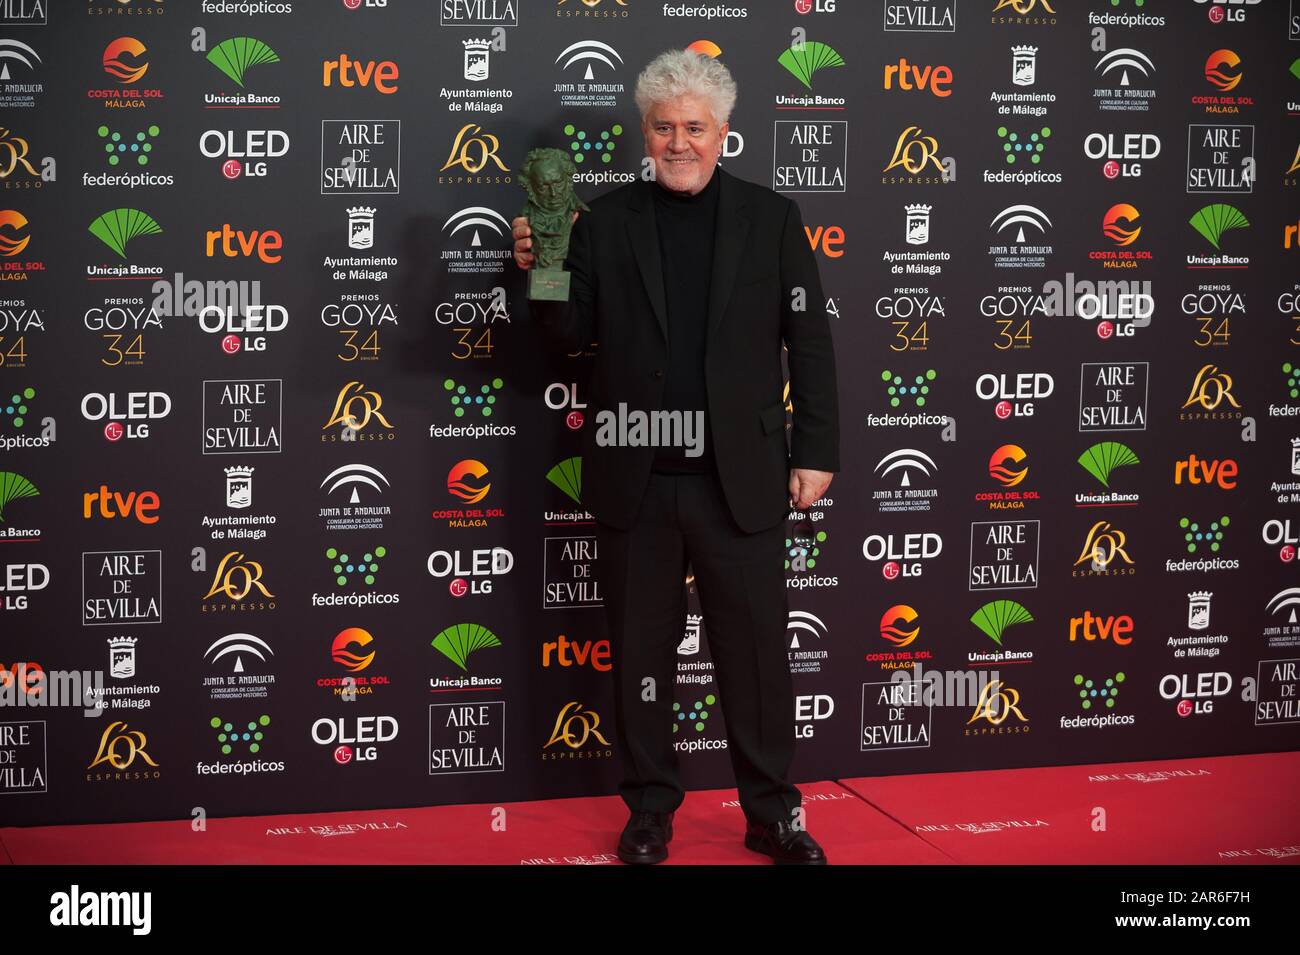 Spanish director Pedro Almodovar poses with his Goya award for the best director on 'Dolor y Gloria' (Pain and Glory) during the 34th edition of Spanish Film Academy's Goya Awards ceremony, at Jose Maria Martin Carpena Sport Palace. Stock Photo